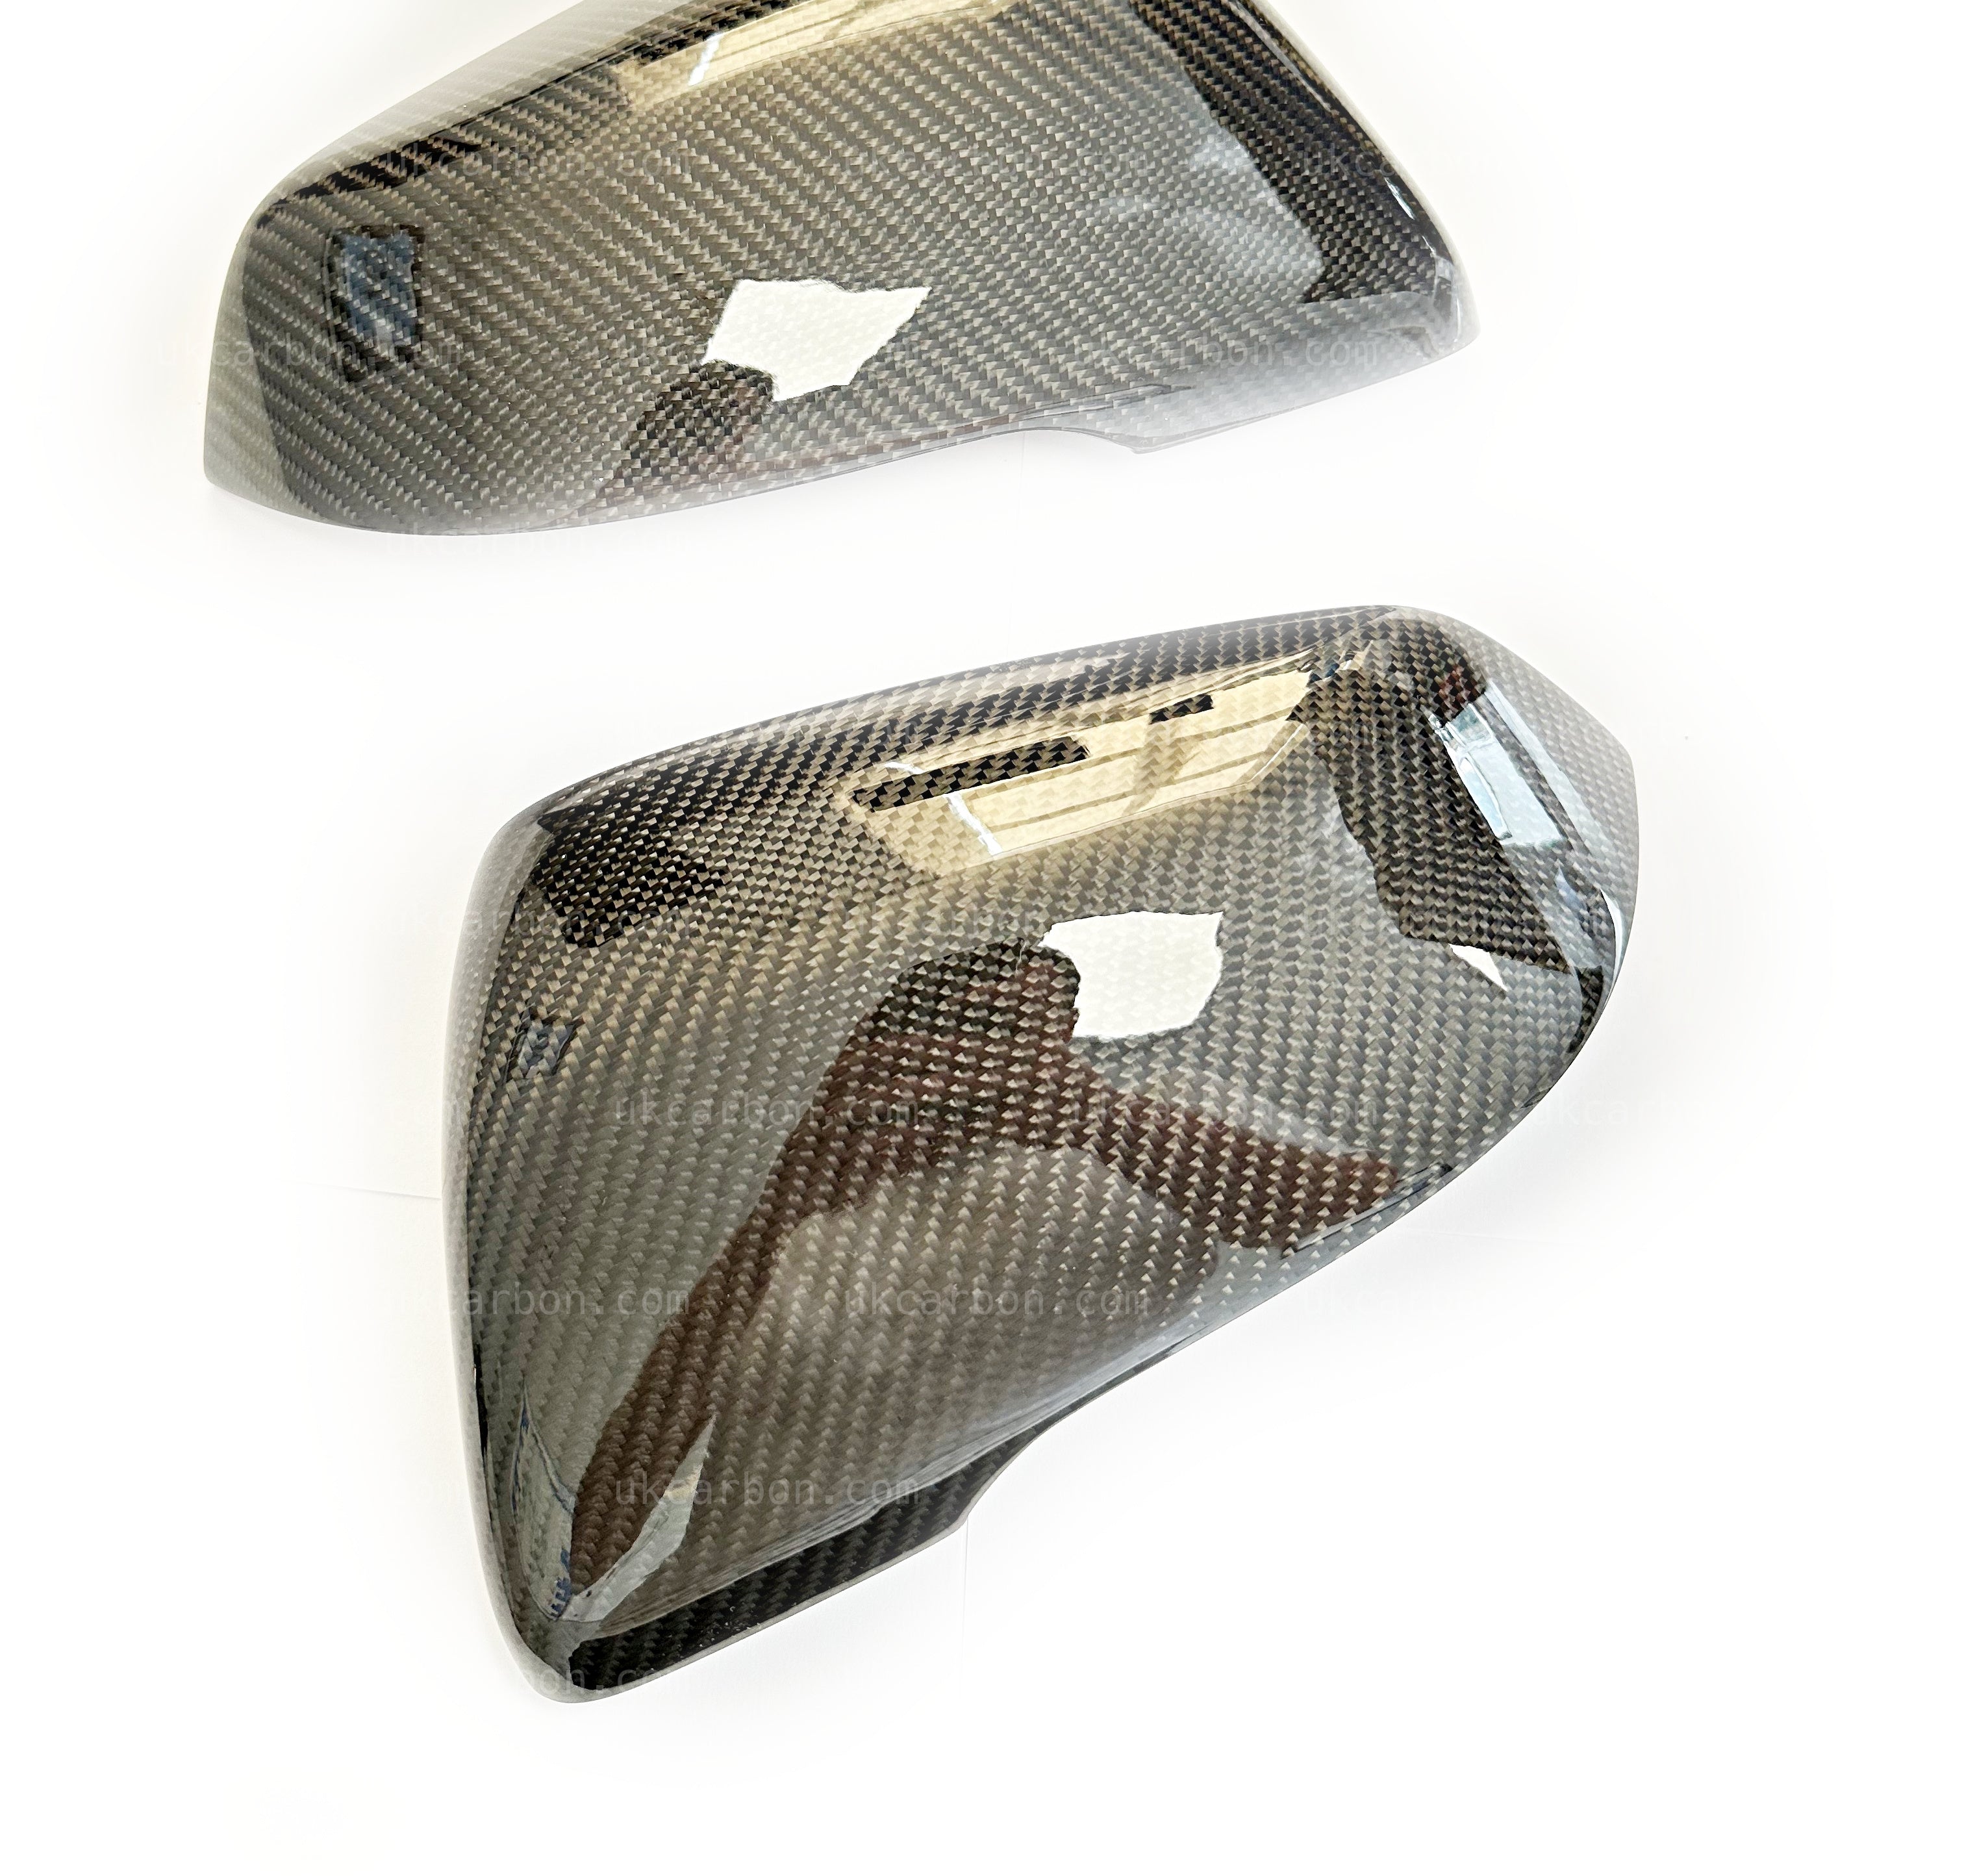 BMW Z4 Carbon Mirror Fibre Wing Cover Replacements M Performance G29 by UKCarbon